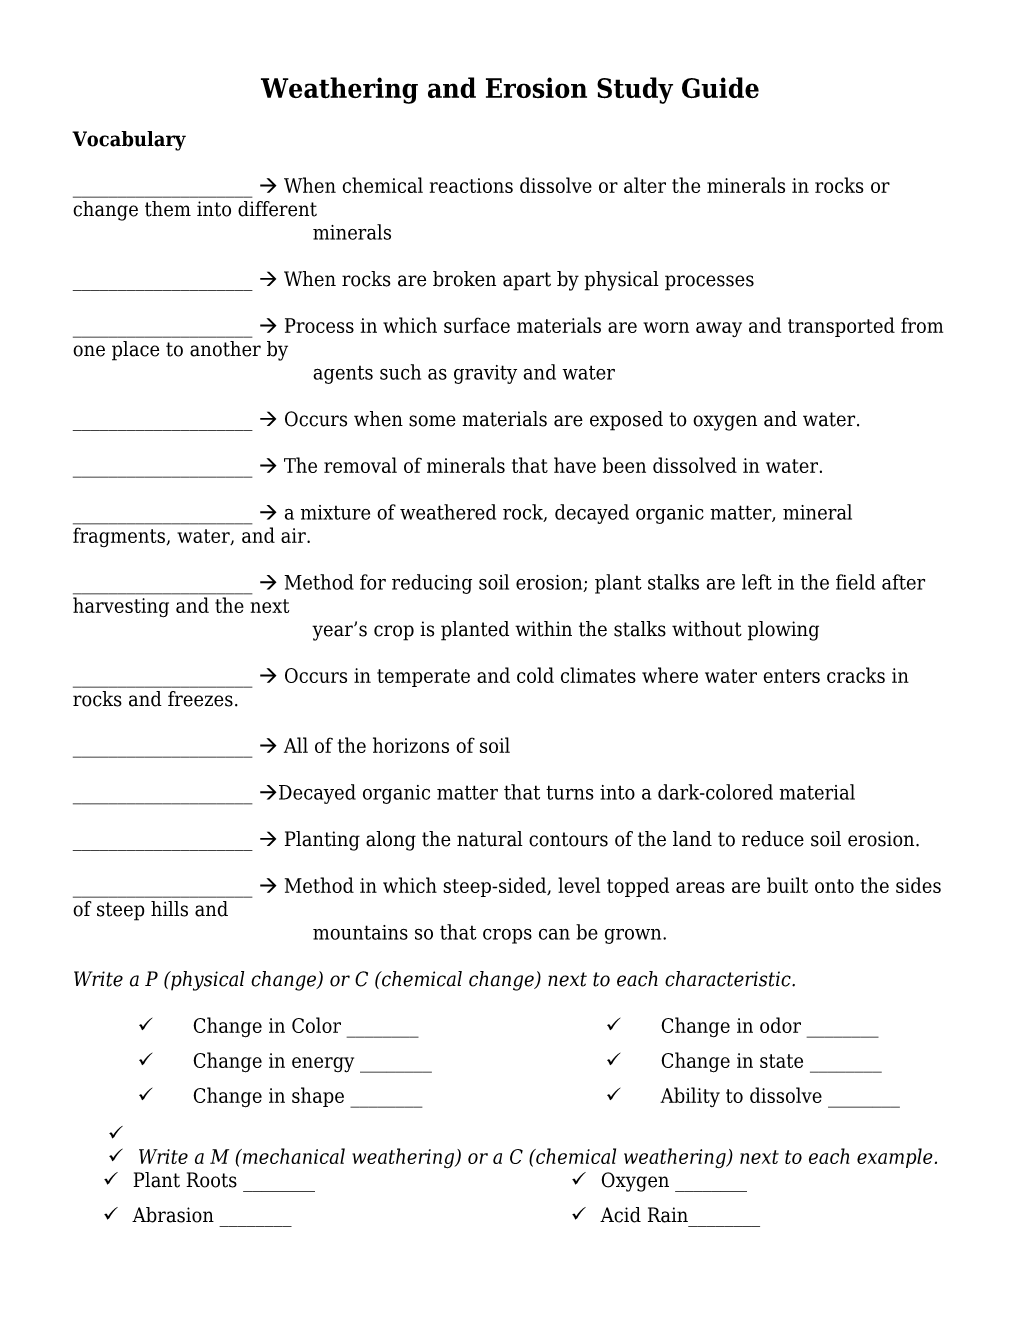 Weathering and Erosion Study Guide